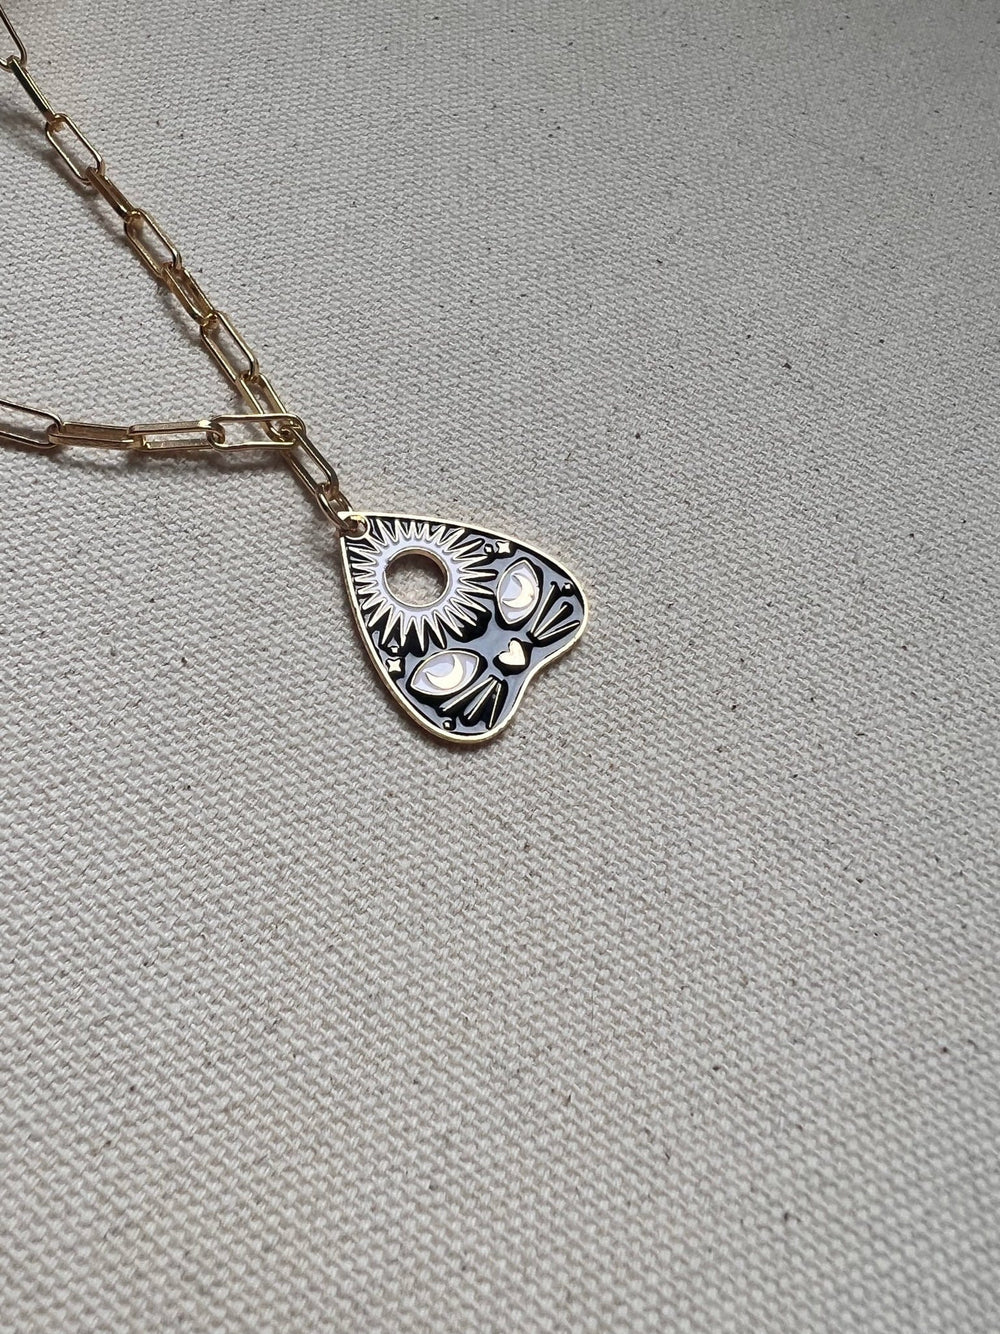 Ouija Kitty necklace with a heart-shaped pendant featuring a sunflower design on a paperclip chain by Necklaces.